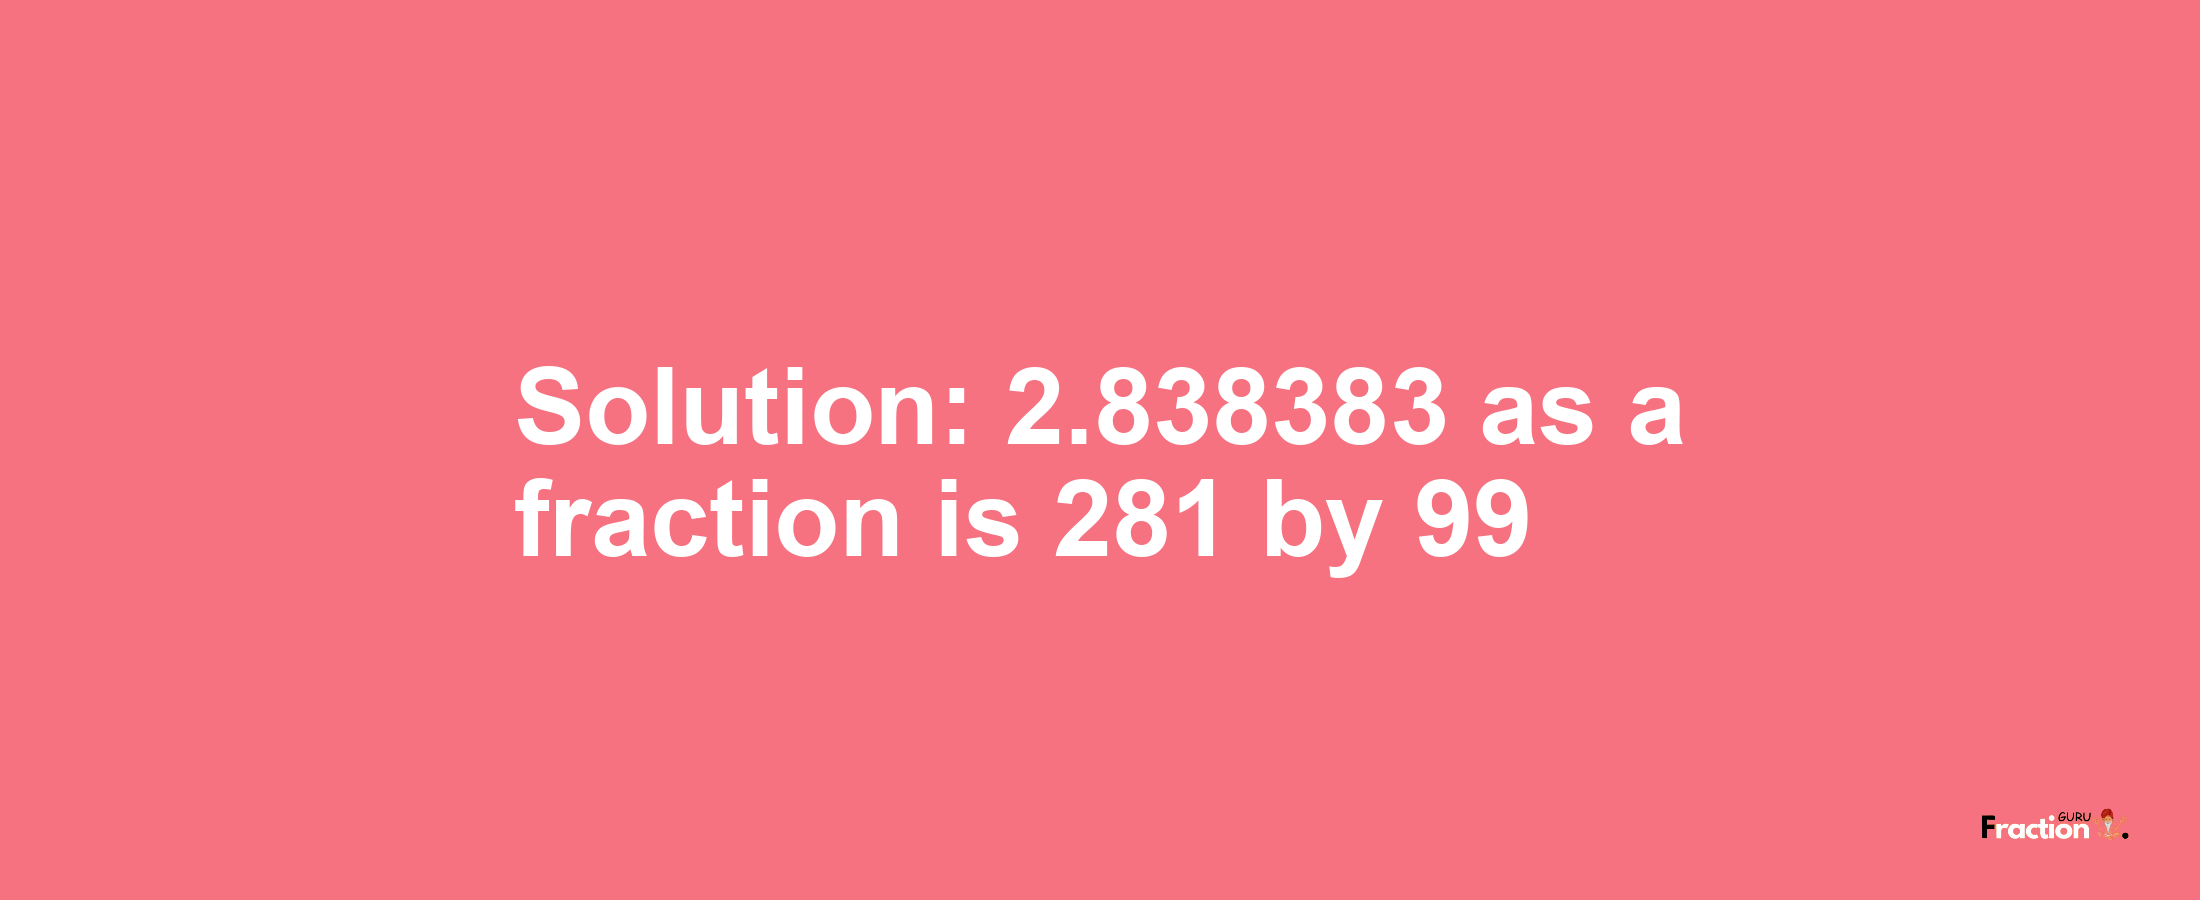 Solution:2.838383 as a fraction is 281/99